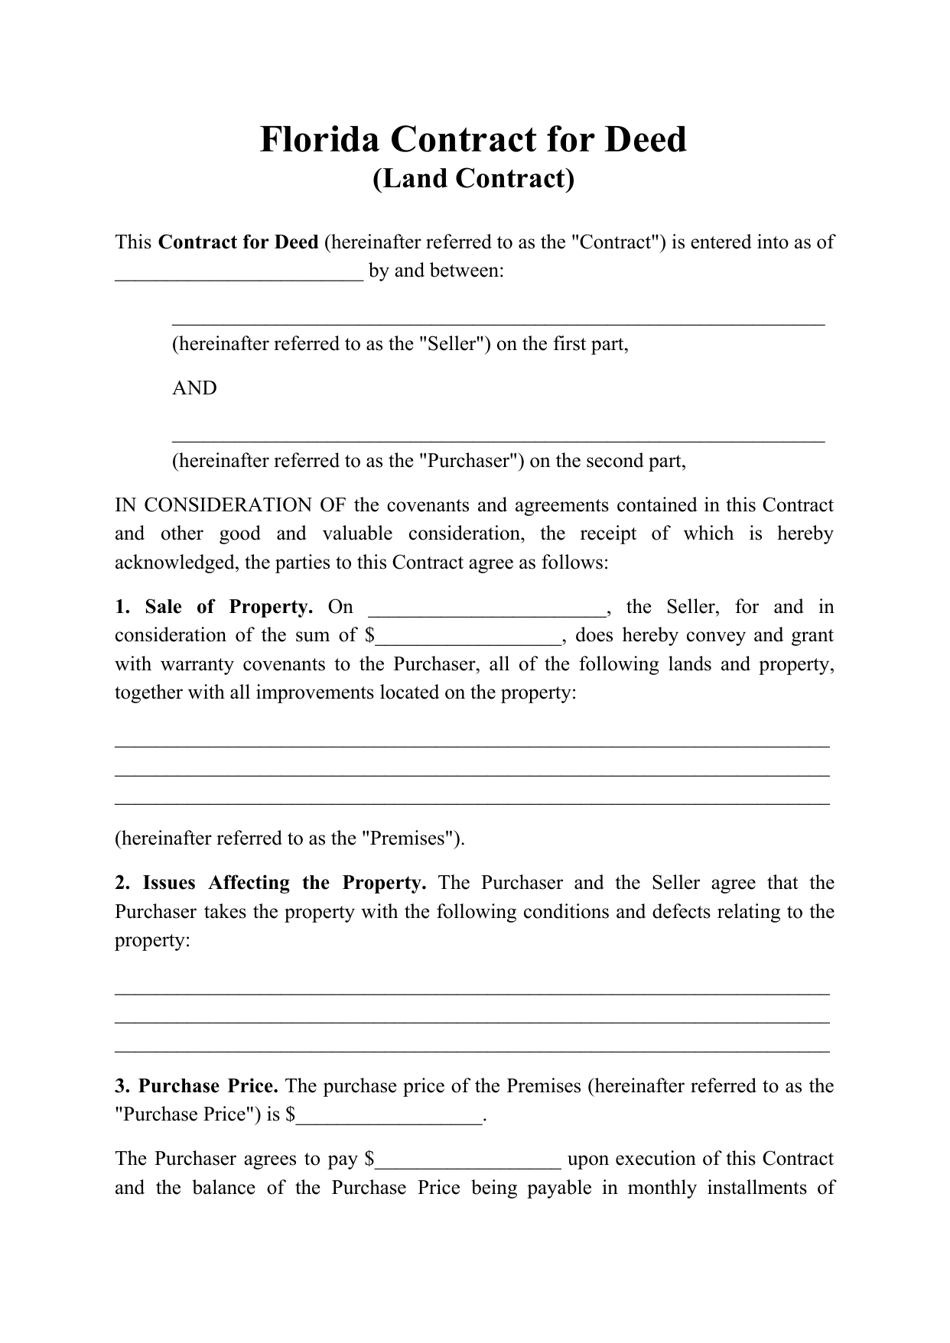 Contract for Deed (Land Contract) - Florida, Page 1